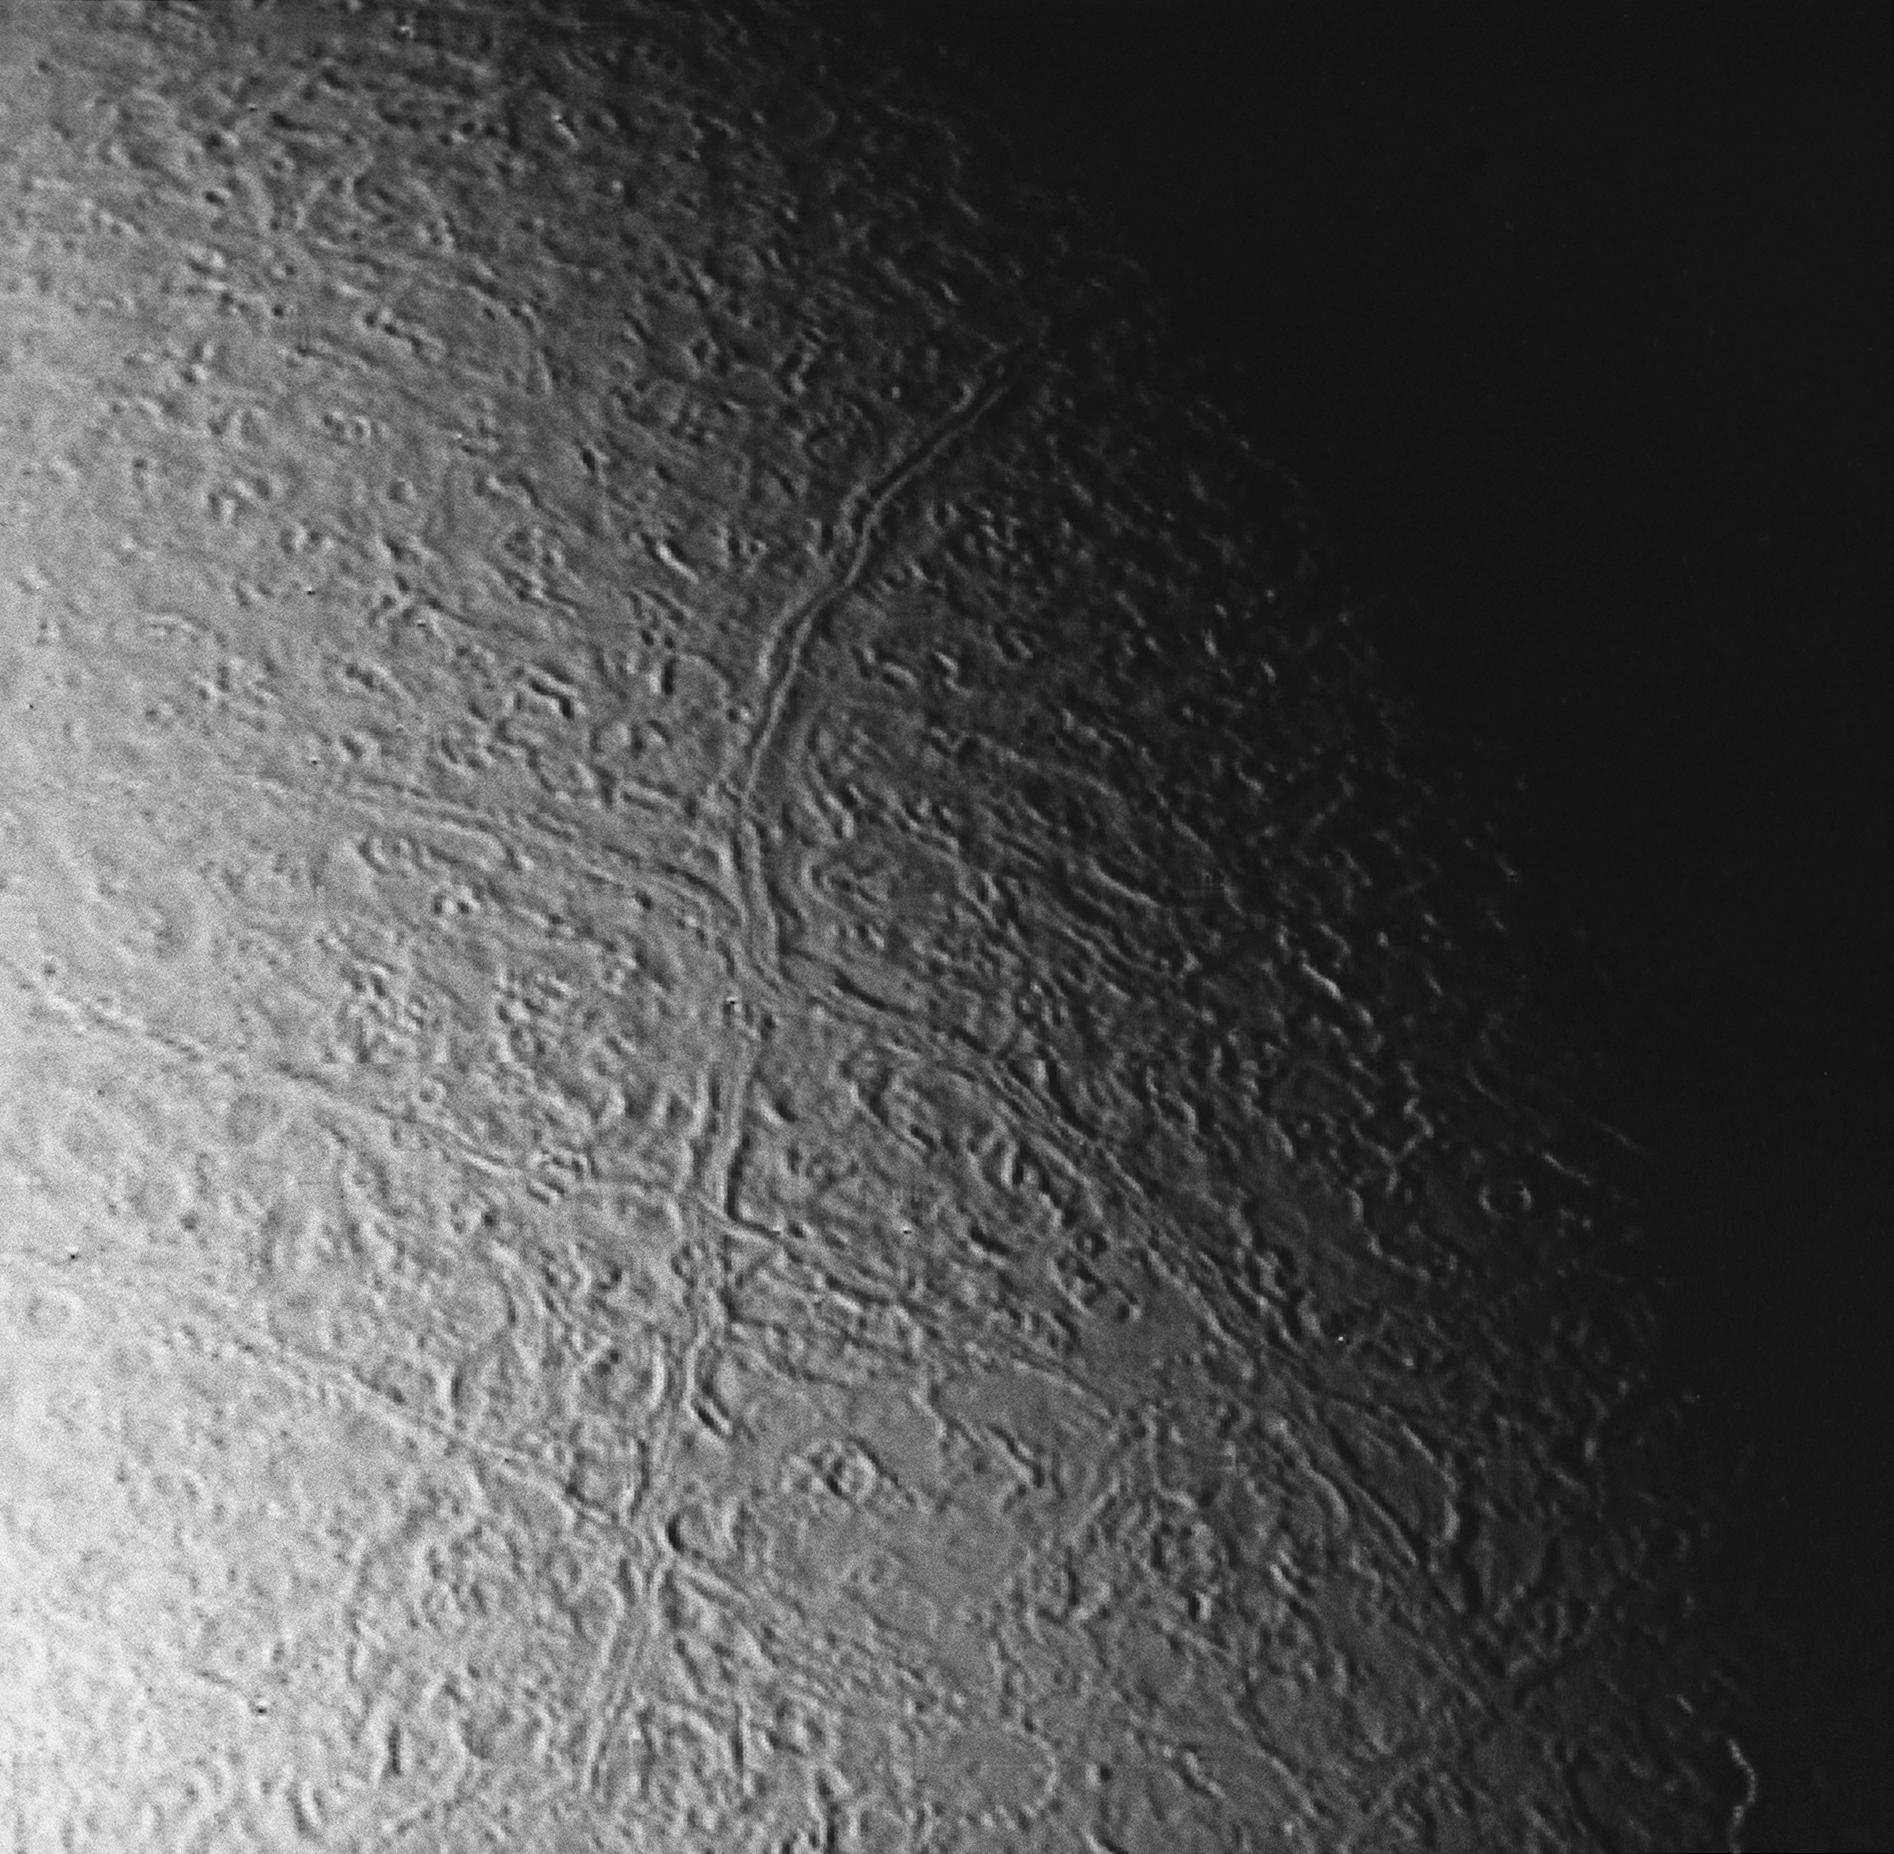 This image of Triton was taken from a distance of about 130,000 kilometers (80,000 miles) at 12:20 a.m. PDT Aug. 25 1989.